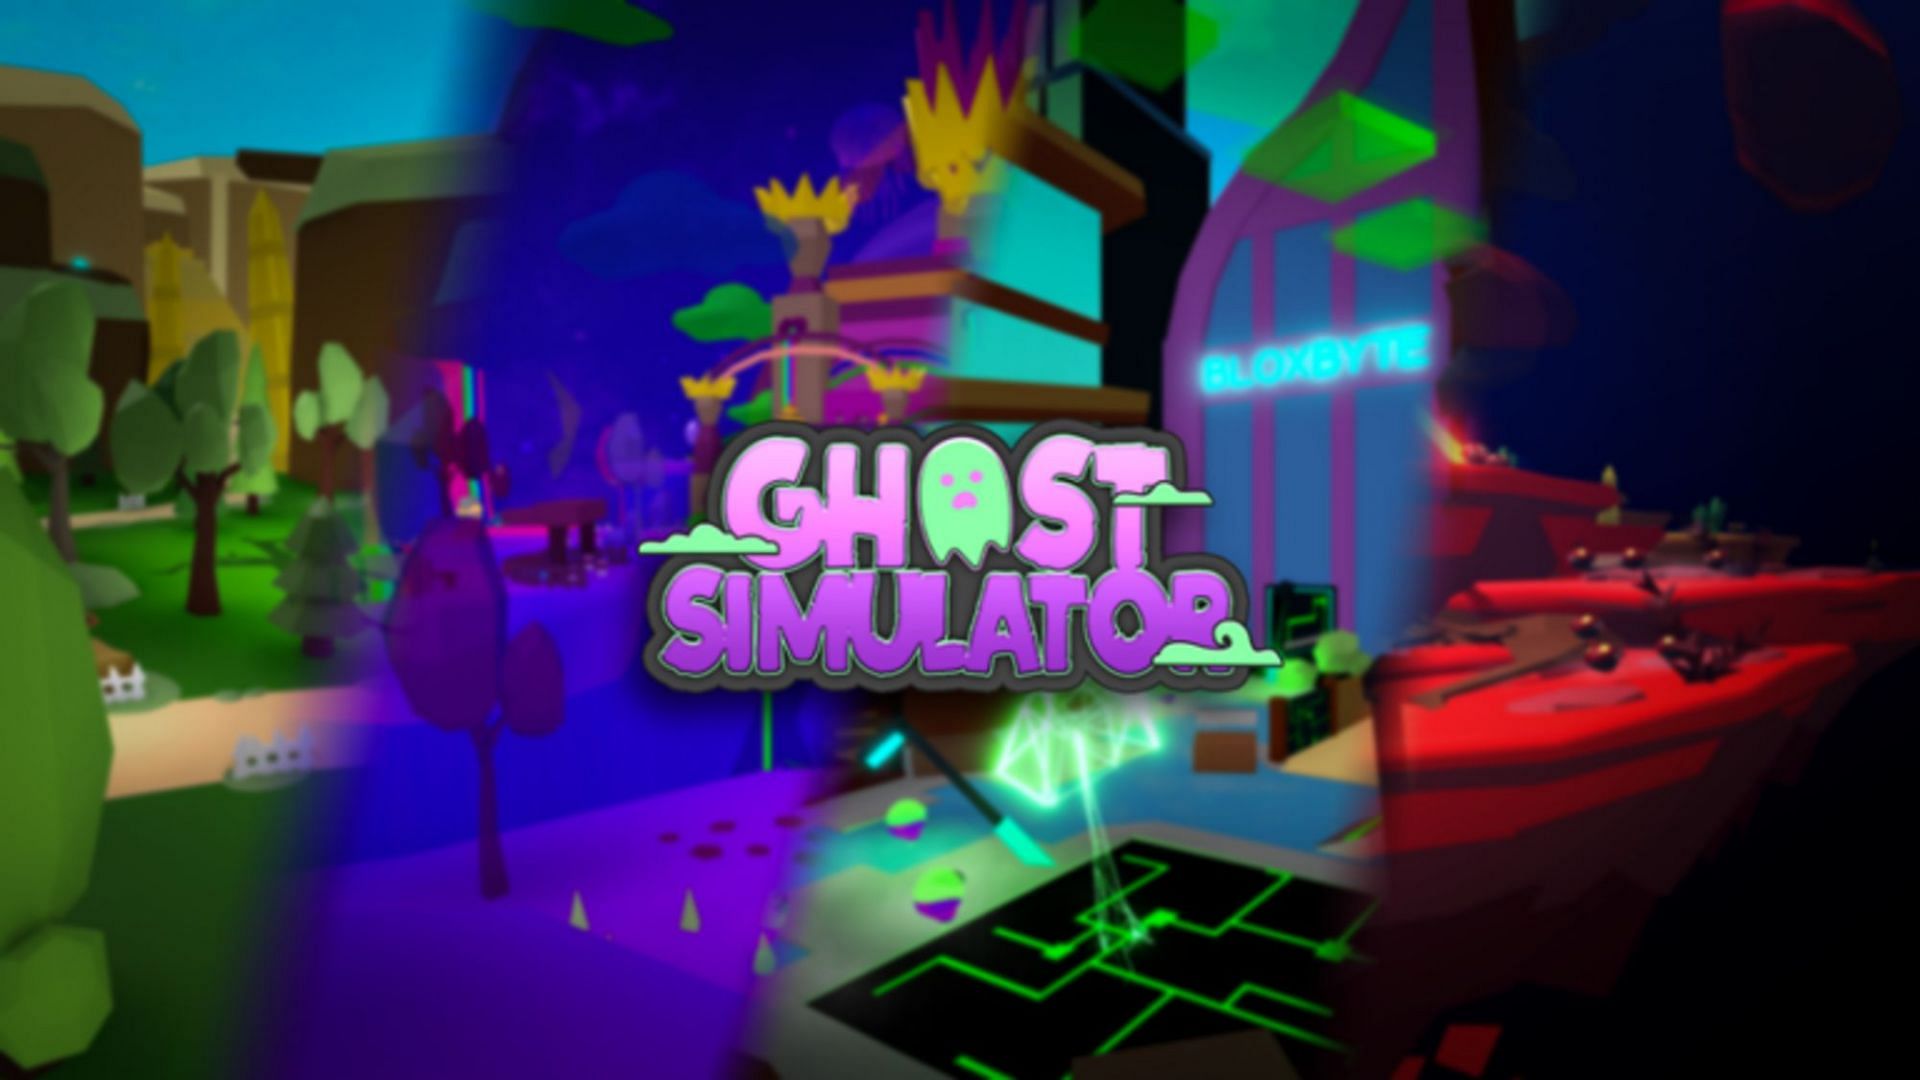 Finish quests based on rich lore in the universe of Ghost Simulator (Image via Roblox)